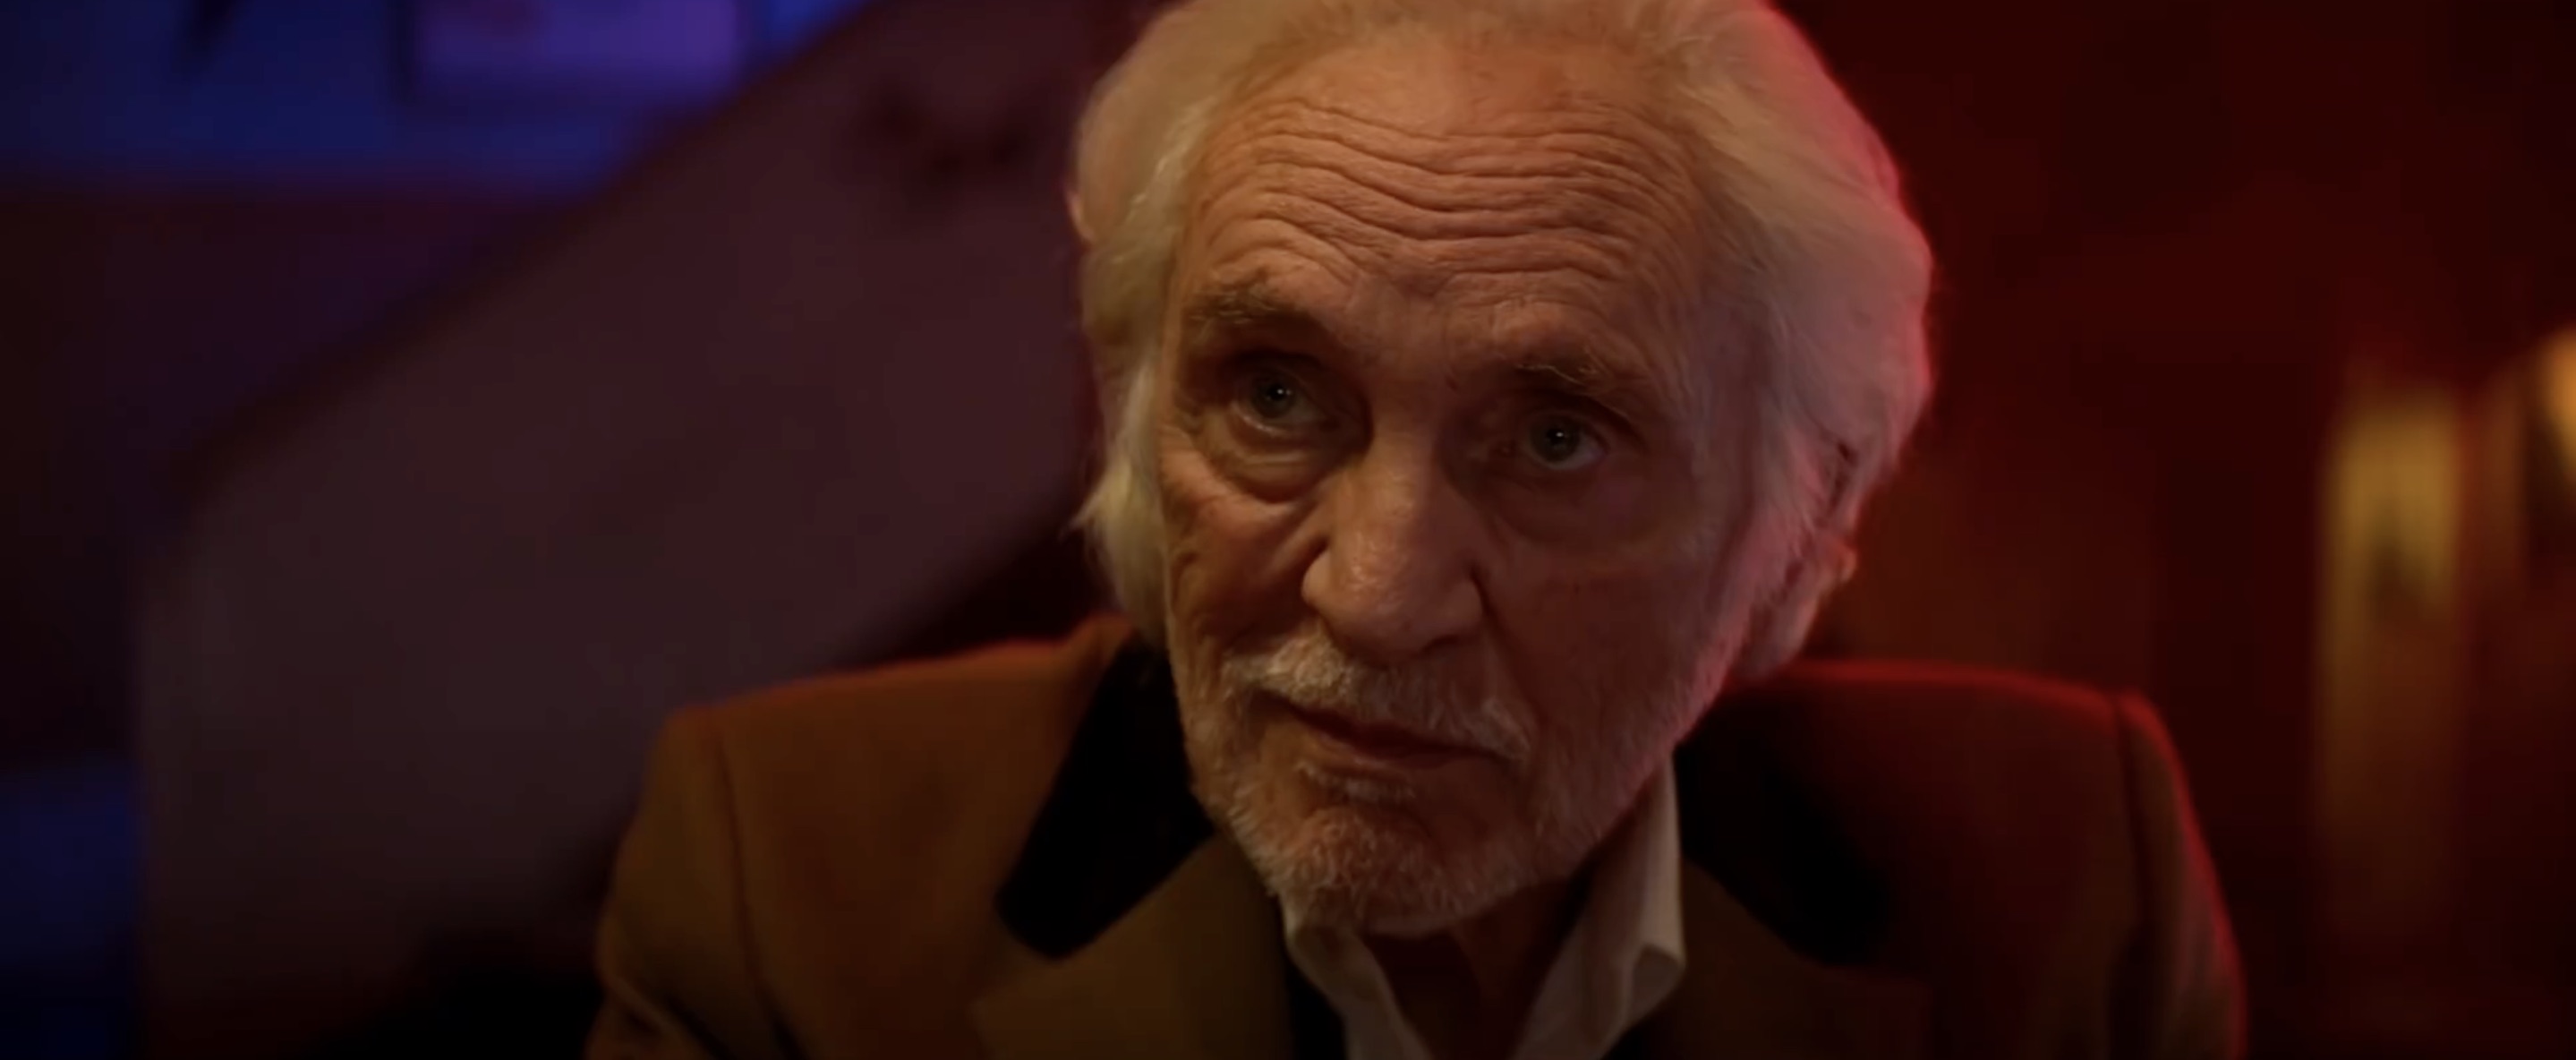 Last Night in Soho Cast - Terence Stamp as The Silver Haired Gentleman